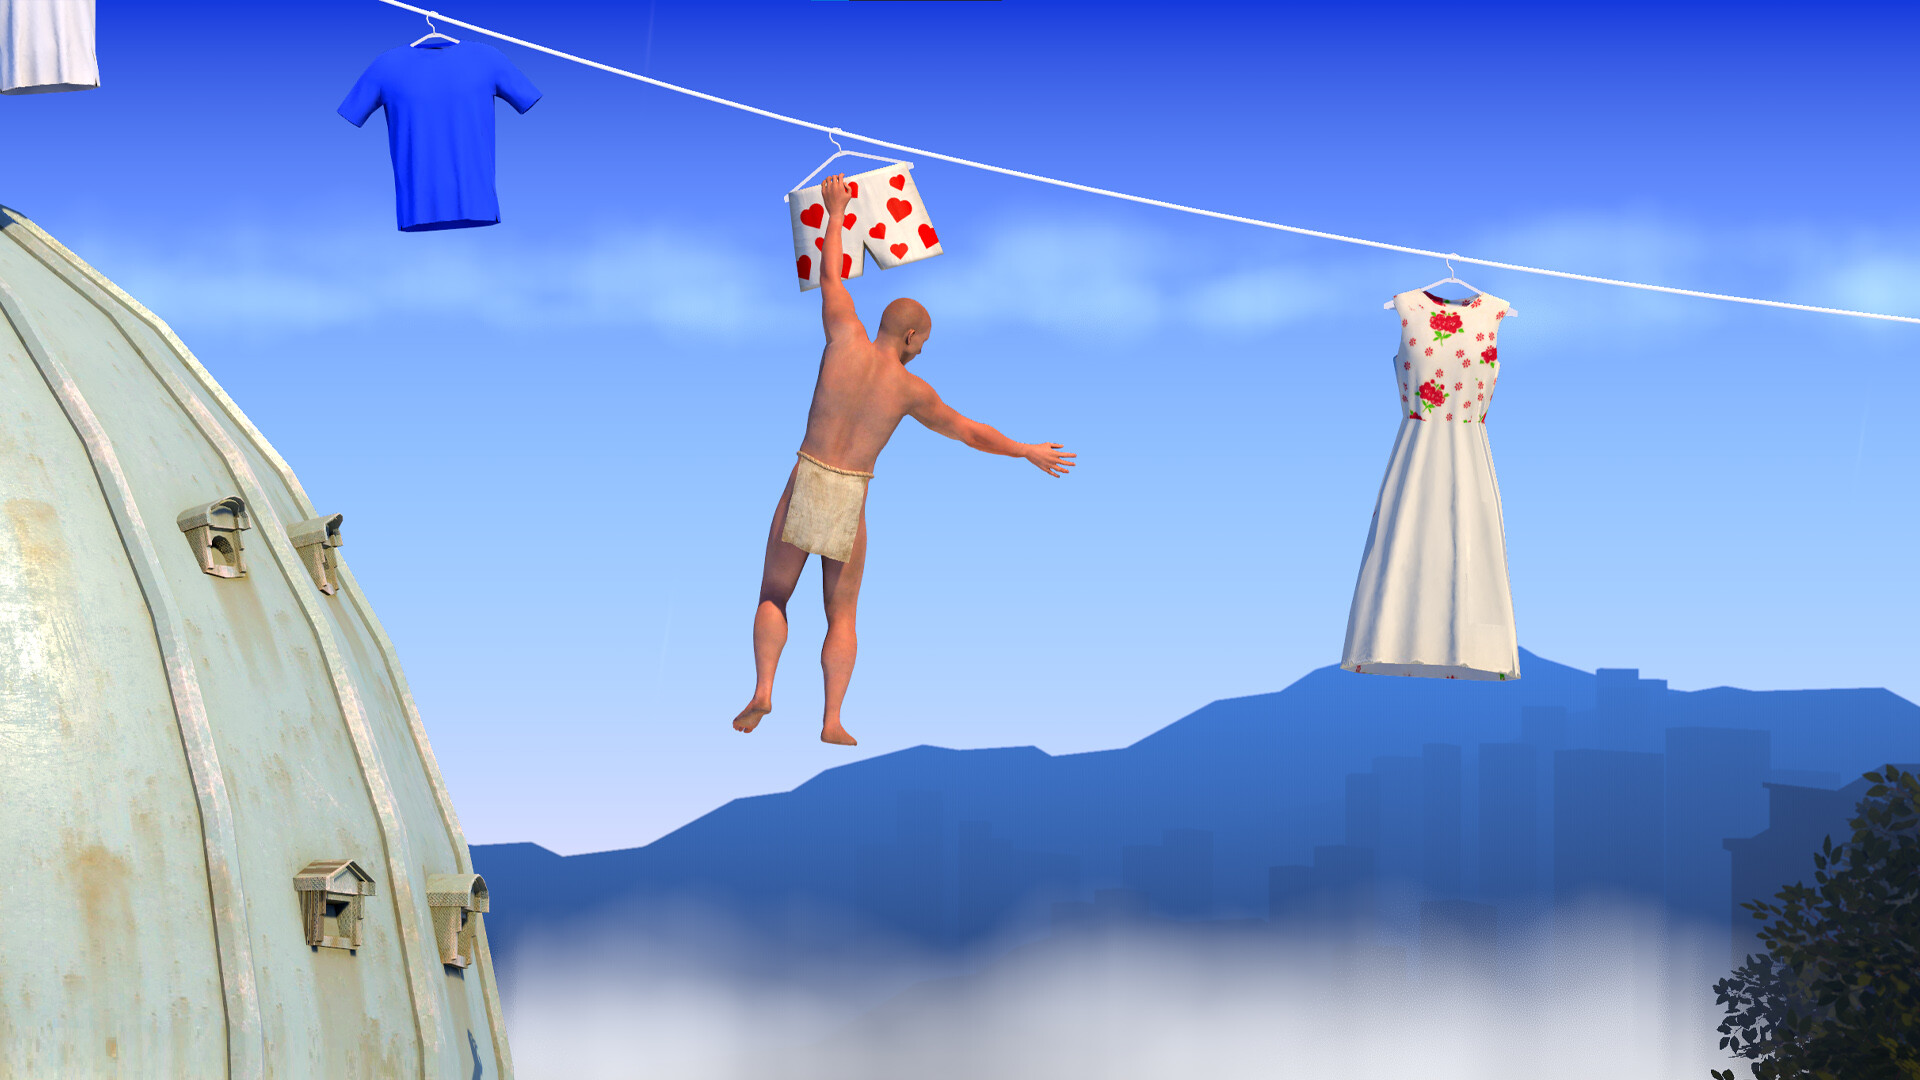 The difficult game about climbing. A difficult game about Climbing игра. Games difficult.